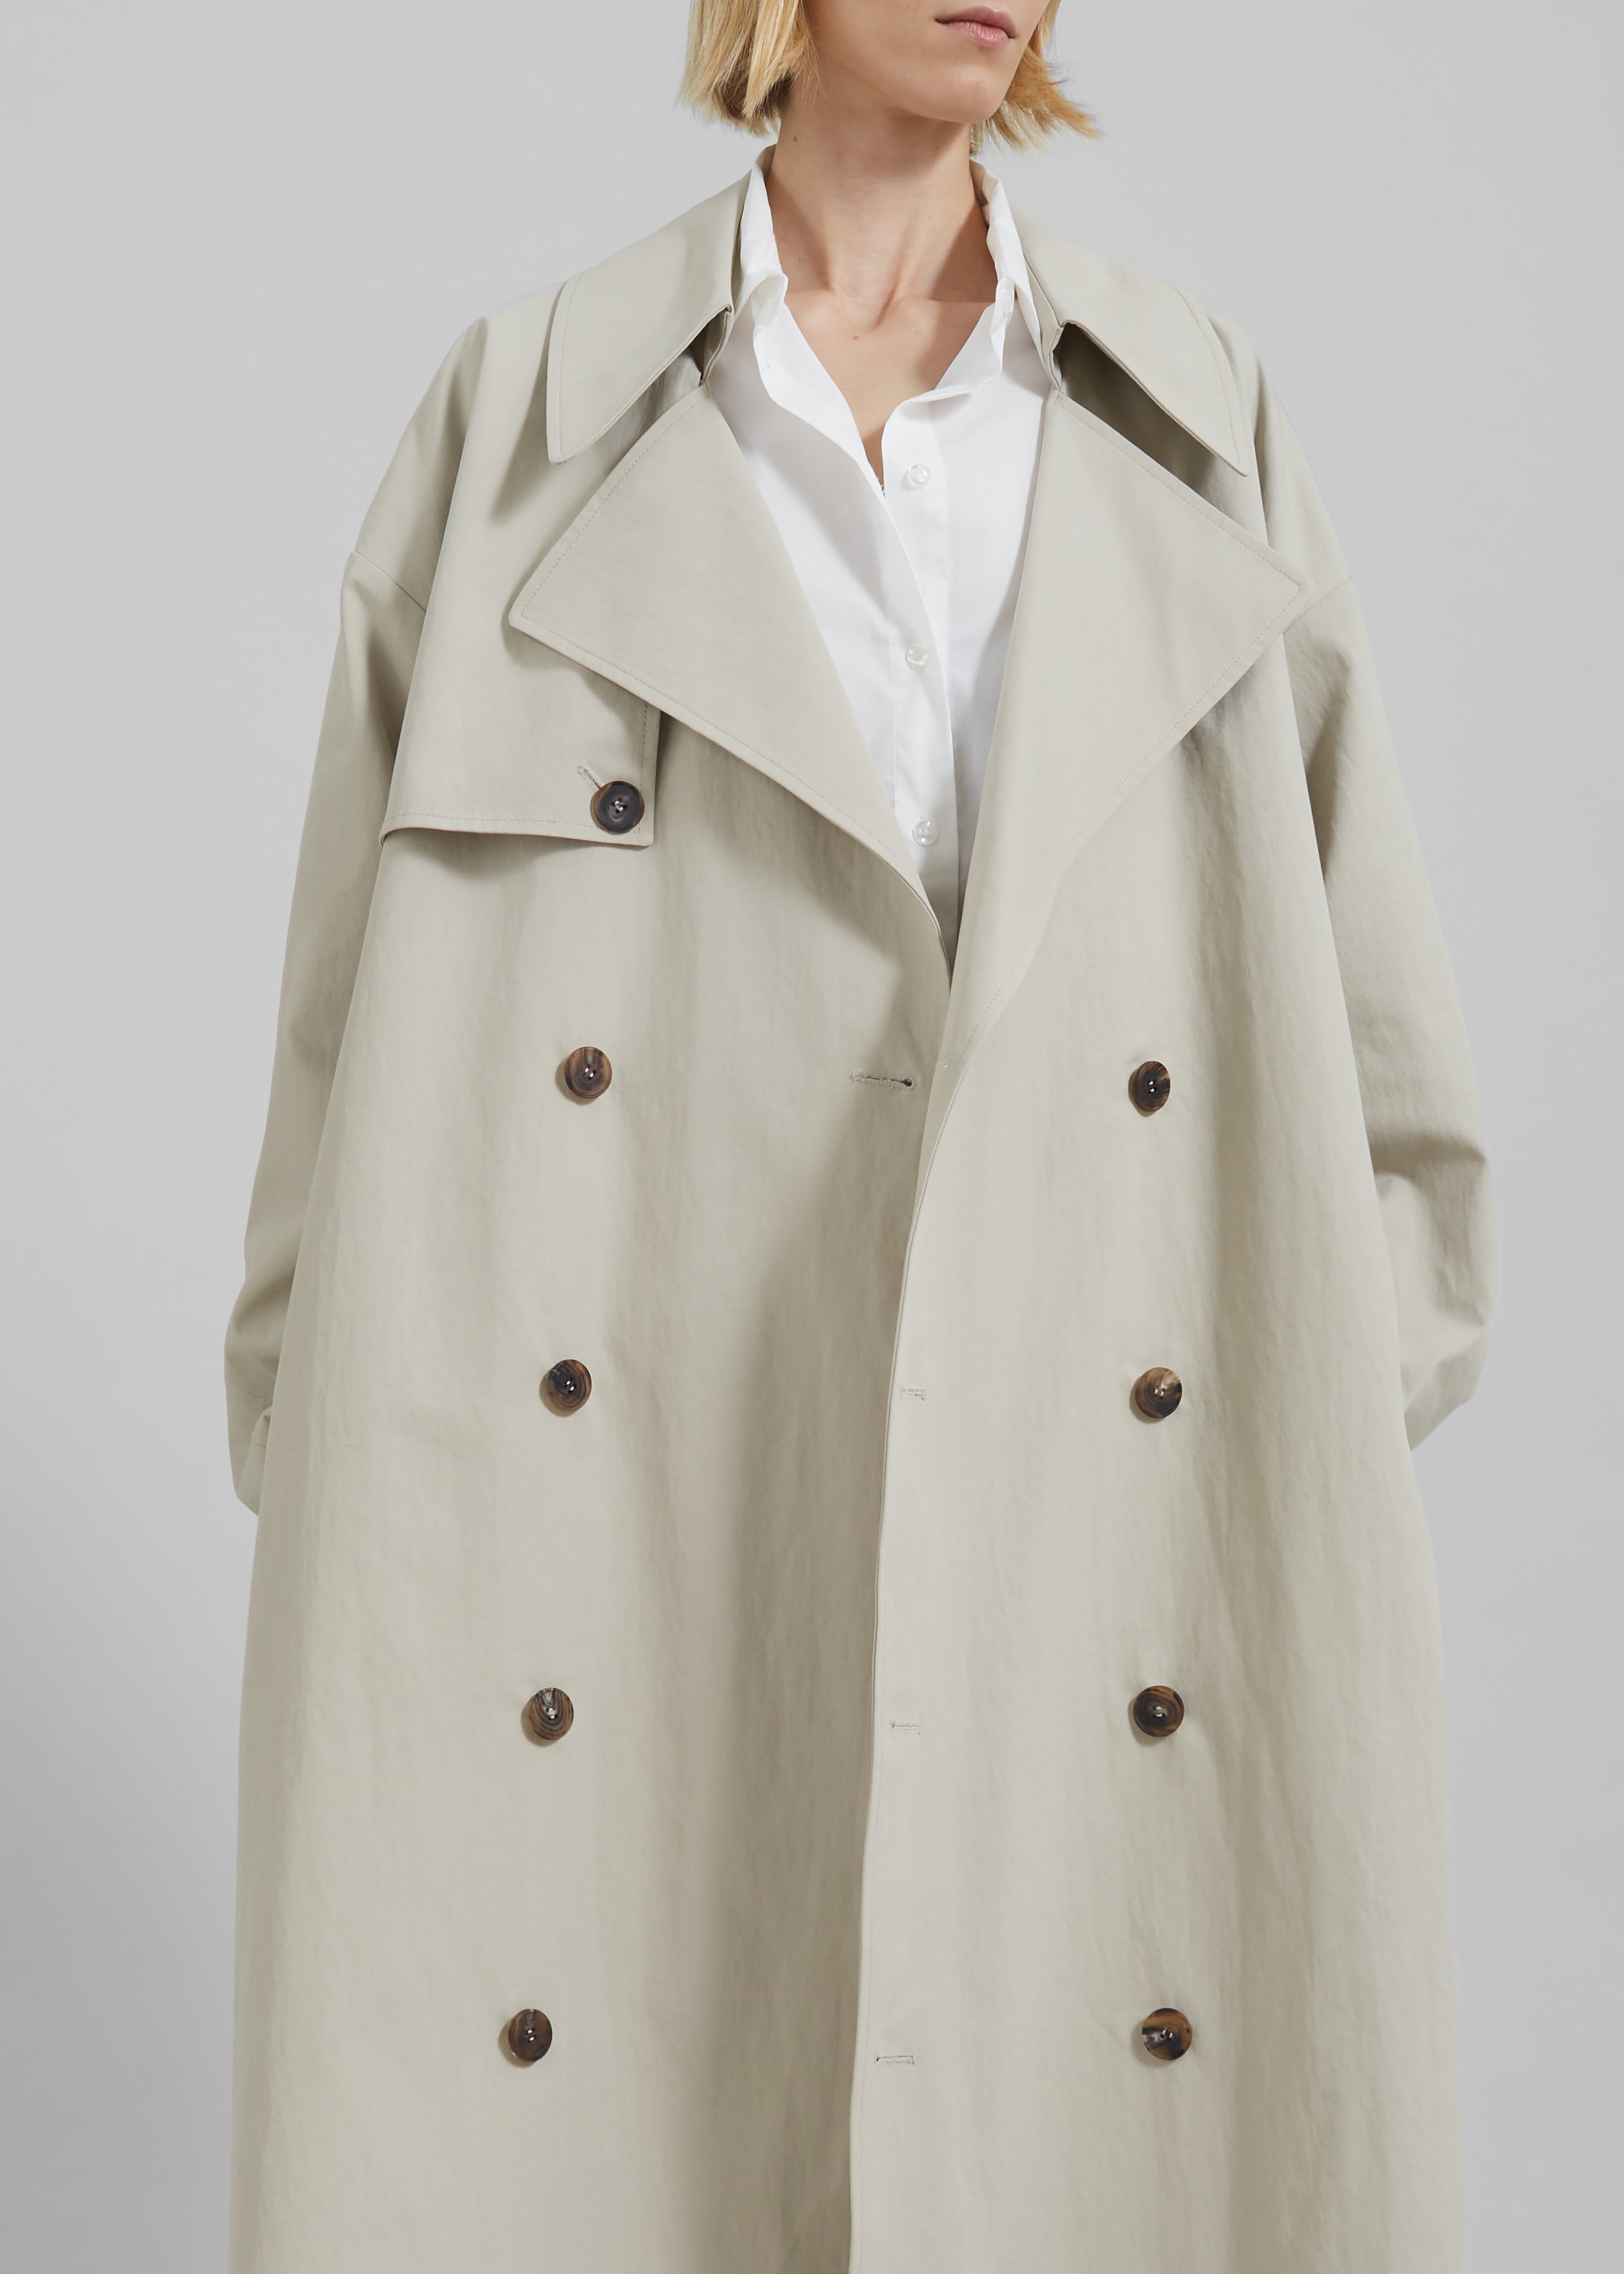 Anika Double Breasted Trench Coat - Beige - 6